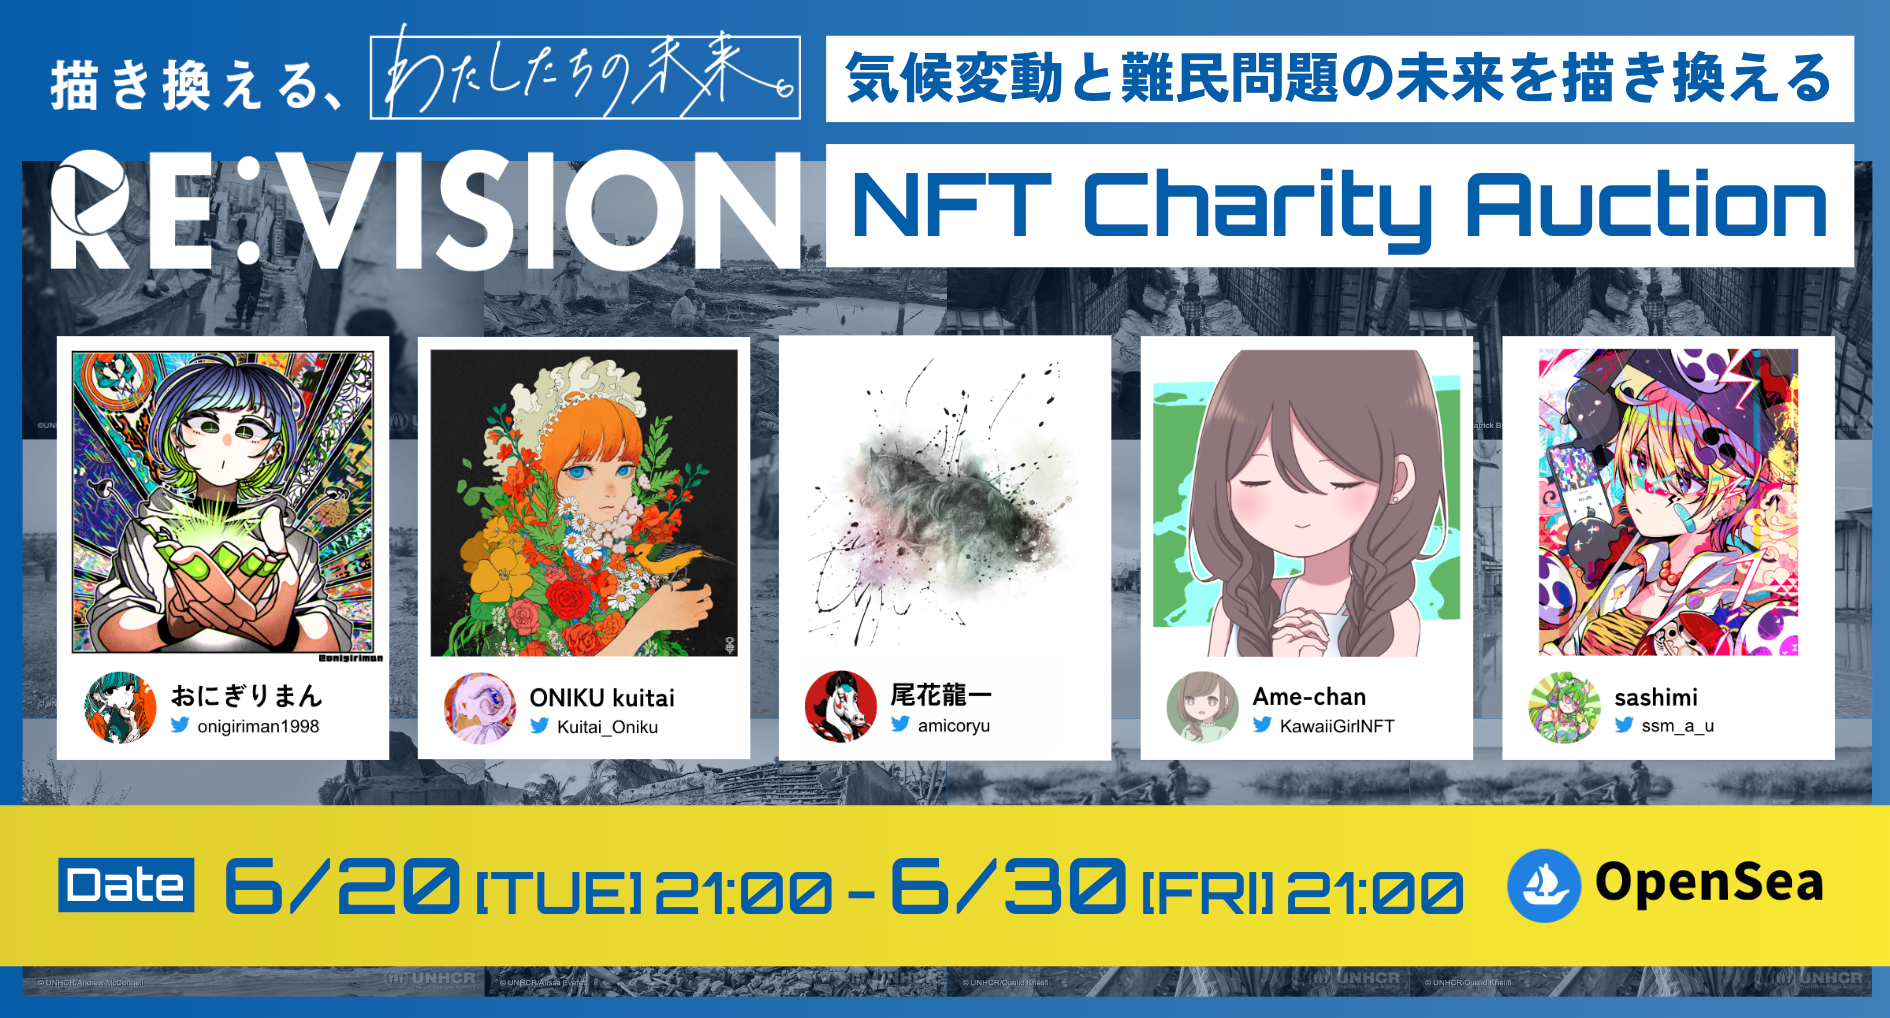 【6/20(TUE)21:00-6/30(FRI)21:00】気候変動と難民問題の未来を描き換える NFT Charity Auction vol.1 with BuzzOne